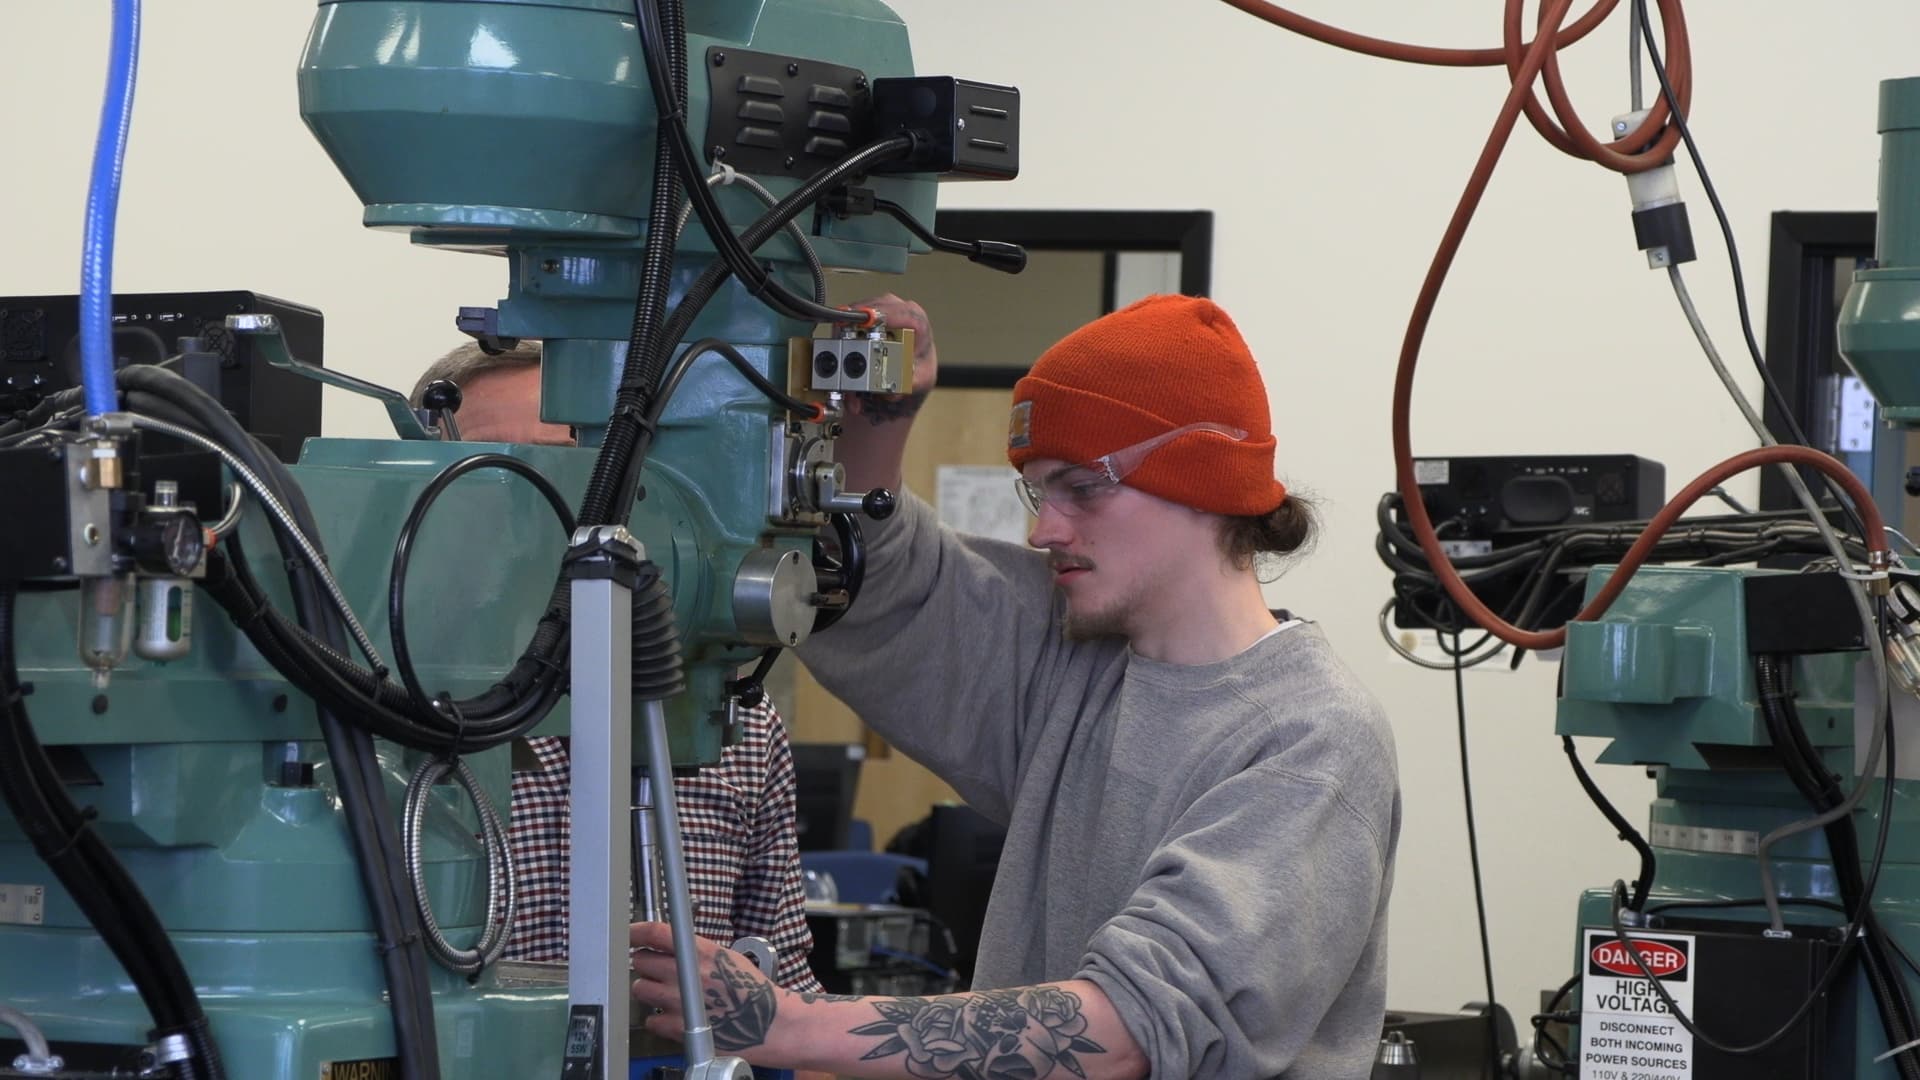 Precision Manufacturing student pictured working in the machine tool lab at NCC